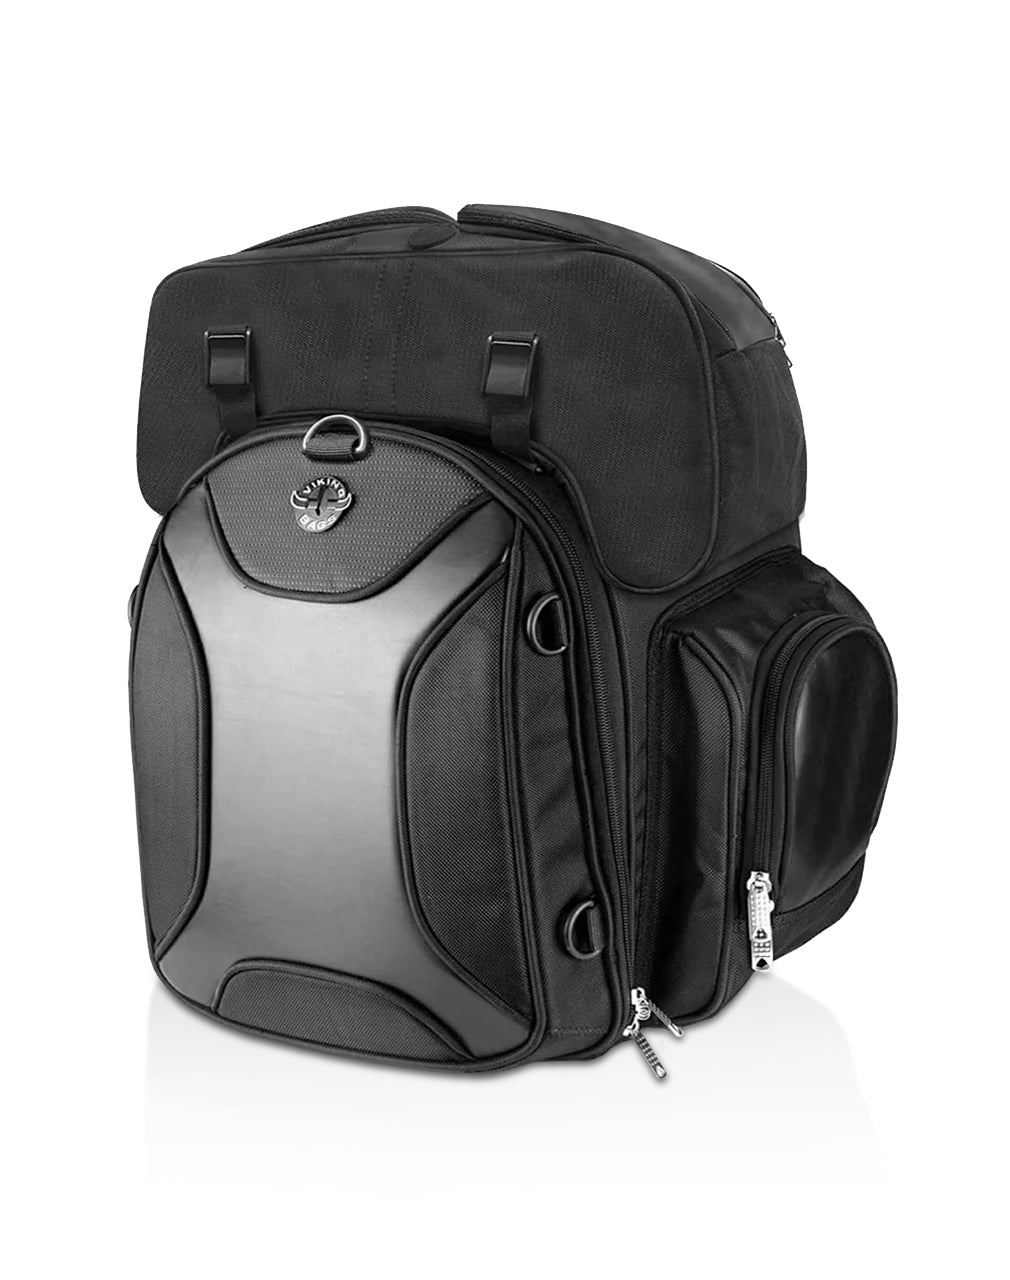 43L - Dagr Extra Large Hysoung Motorcycle Tail Bag